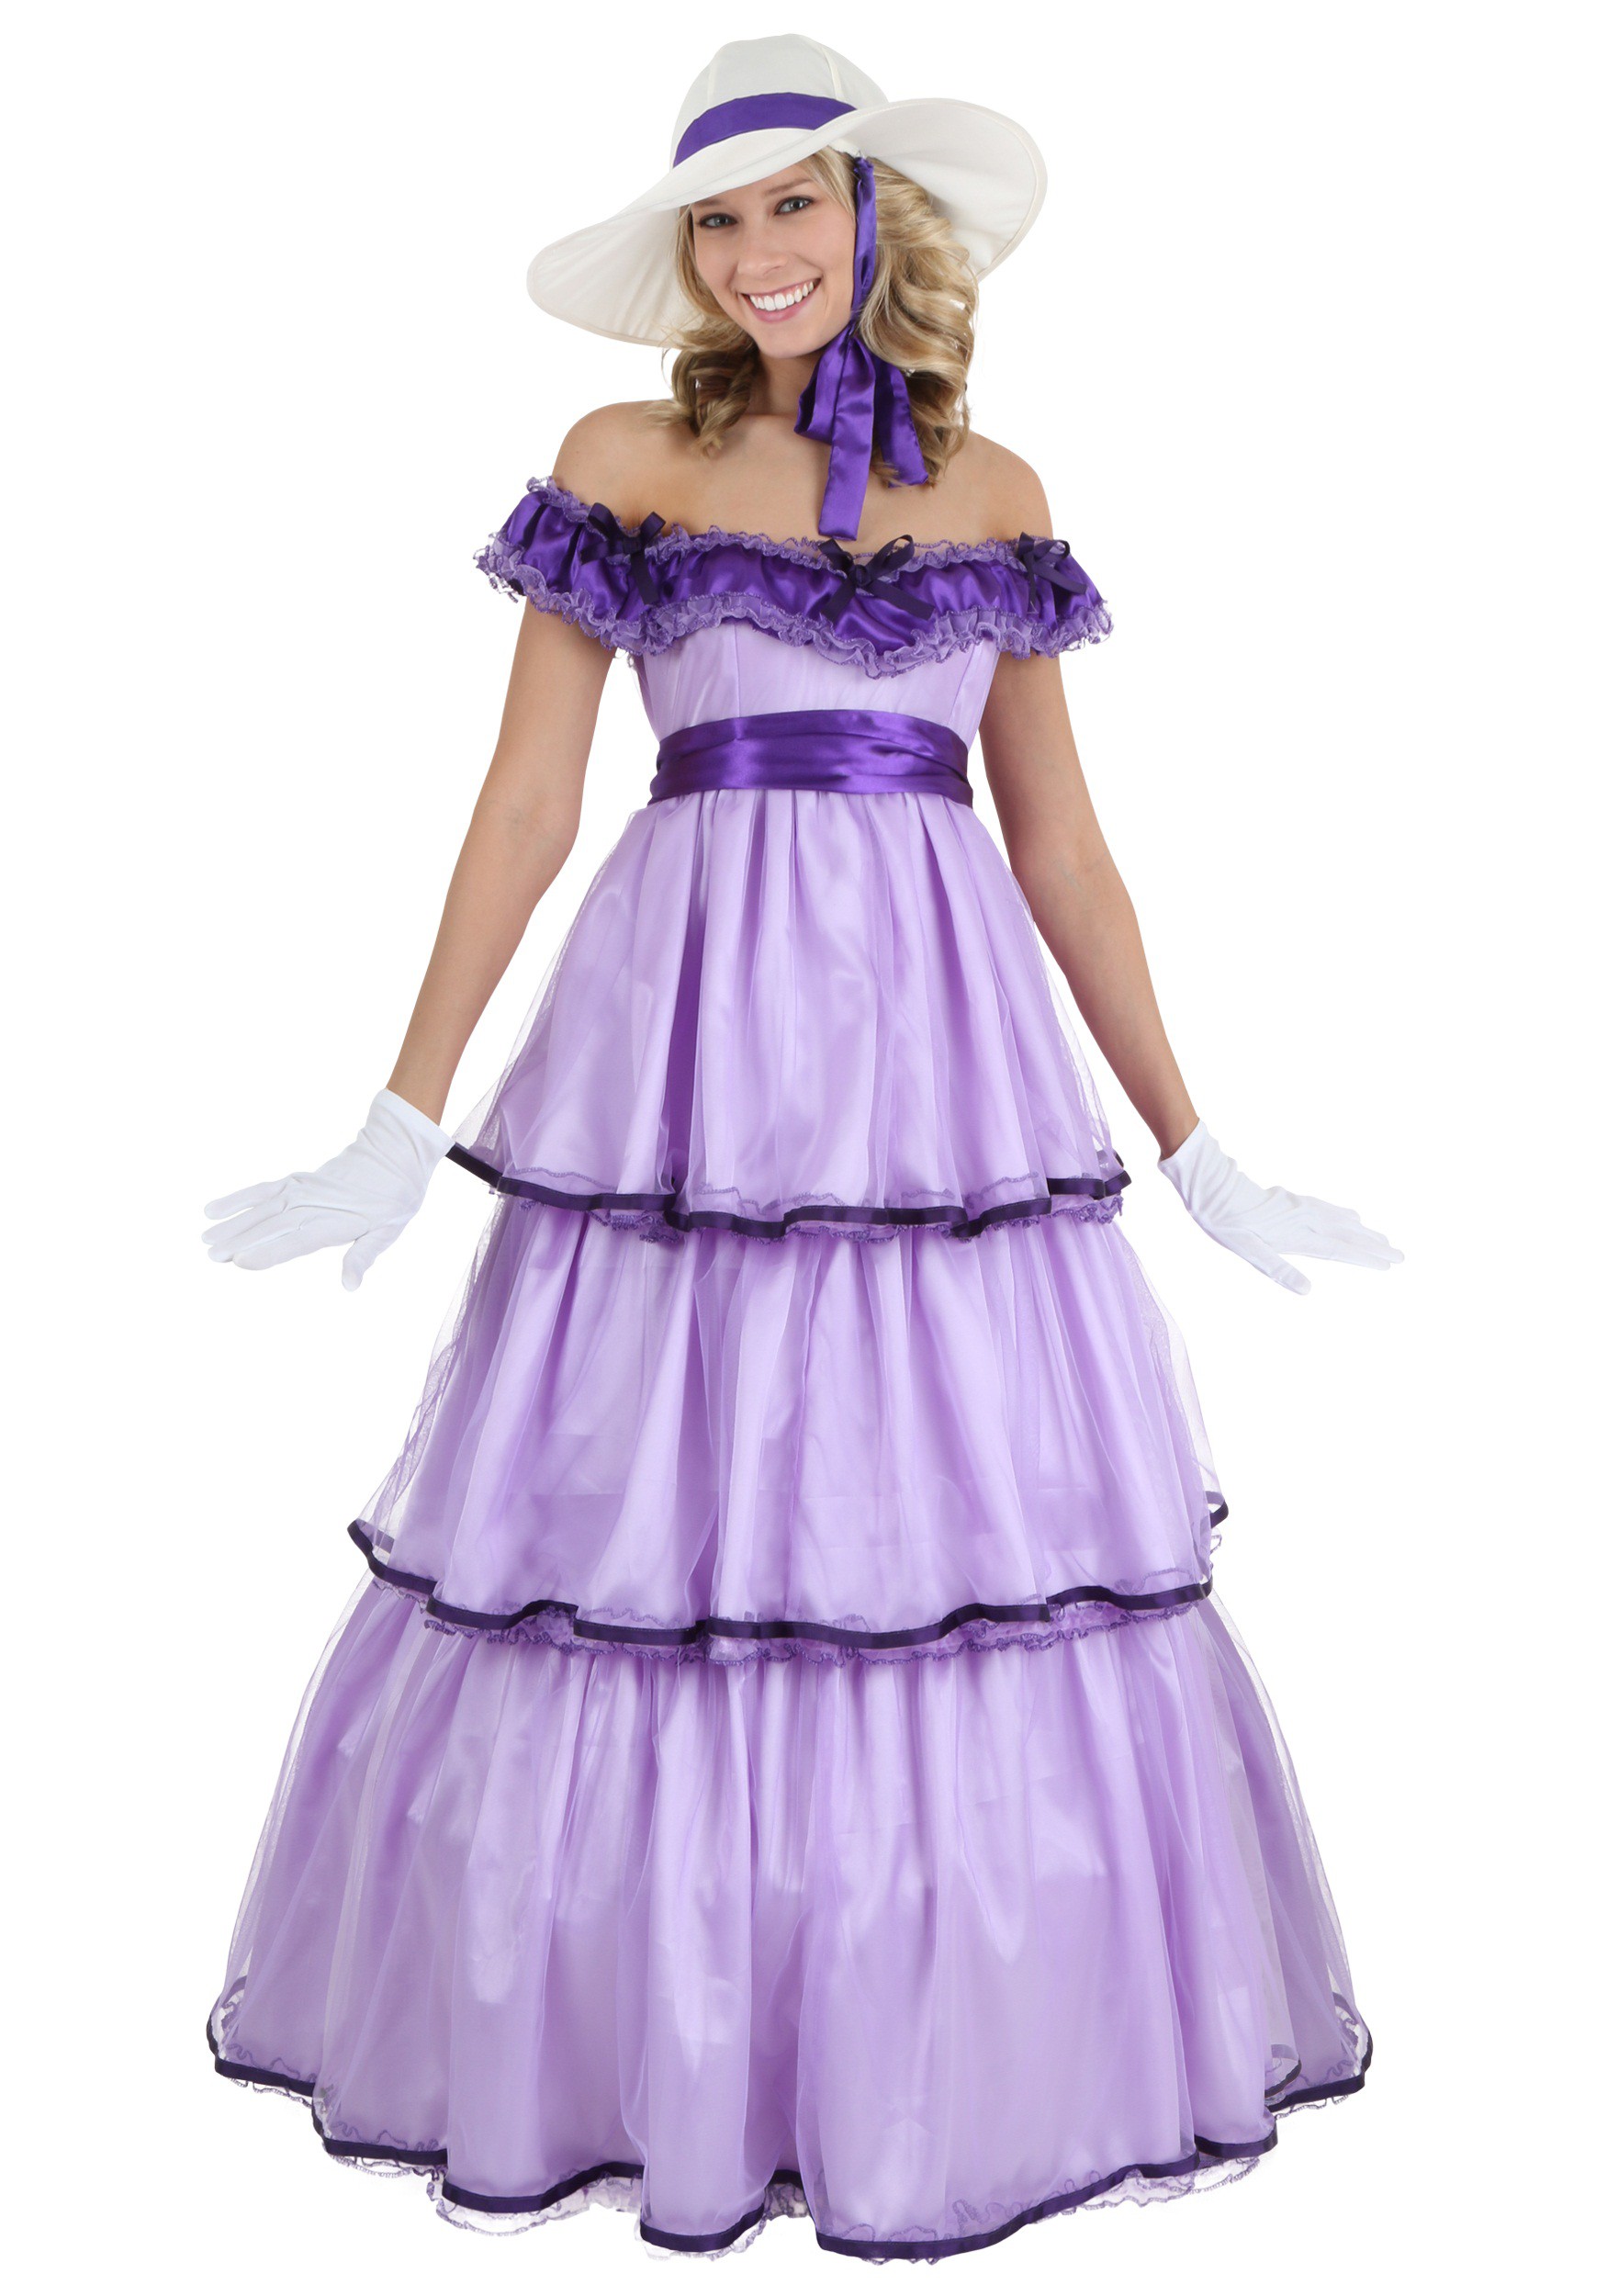 Plus Size Deluxe Southern Belle Women’s Costume